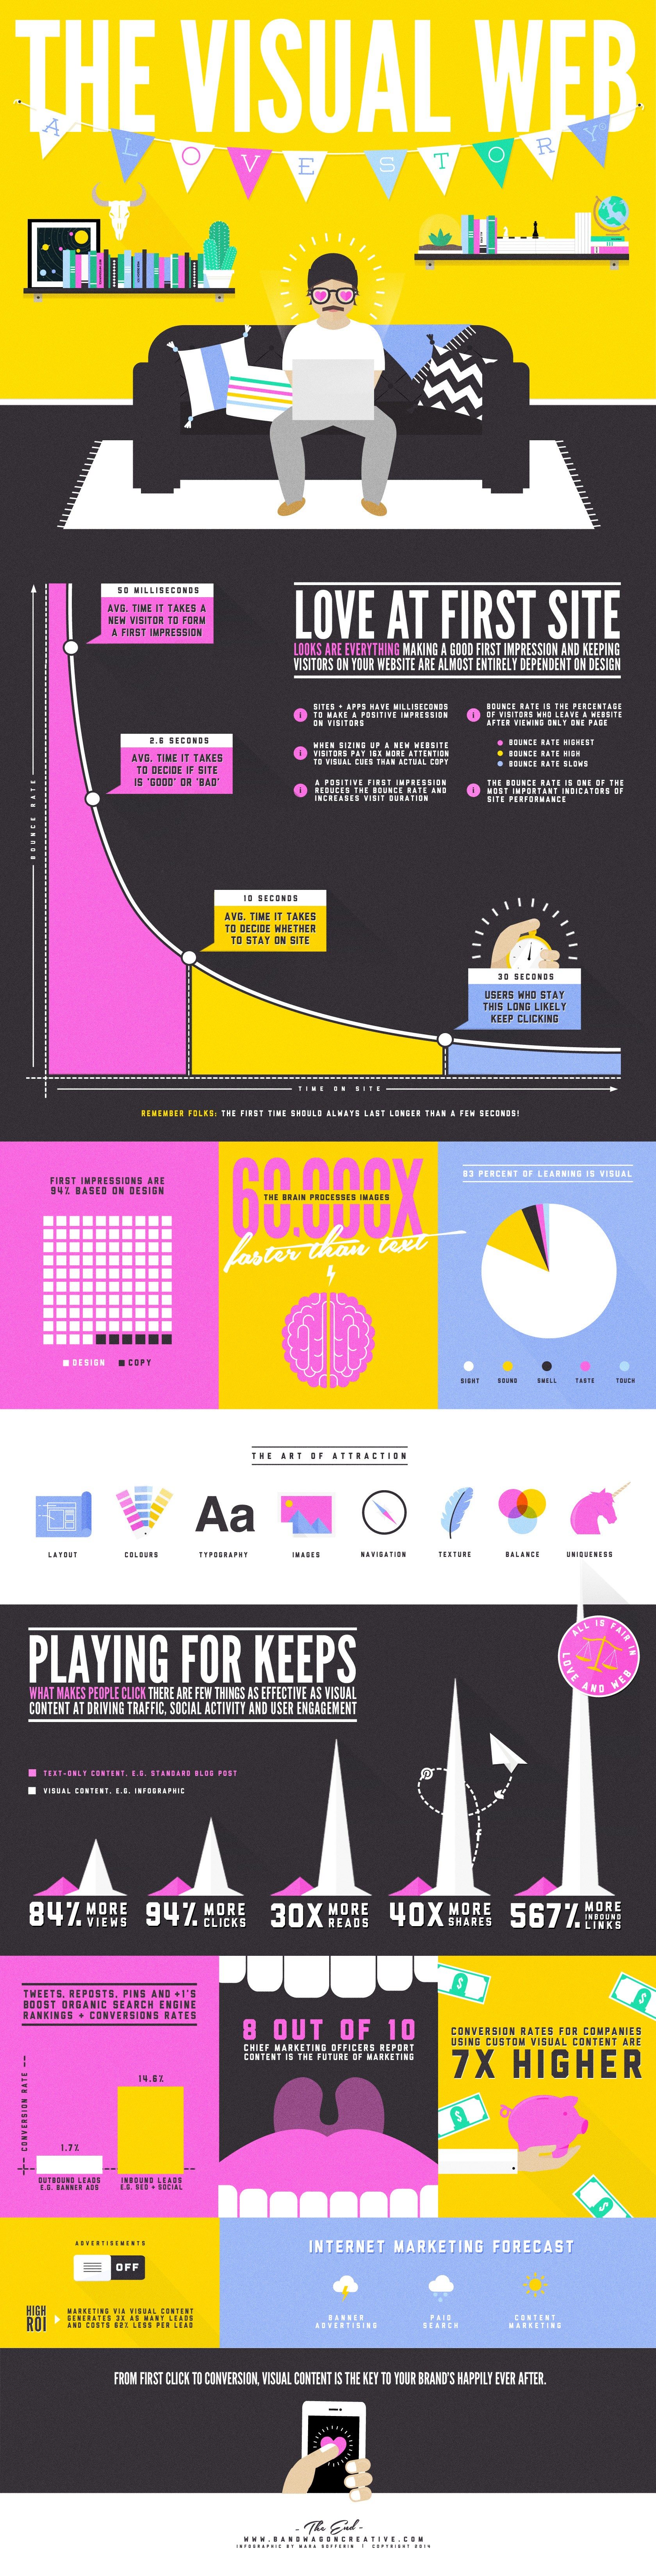 Top Stats To Help You Decide on Visual Content Marketing